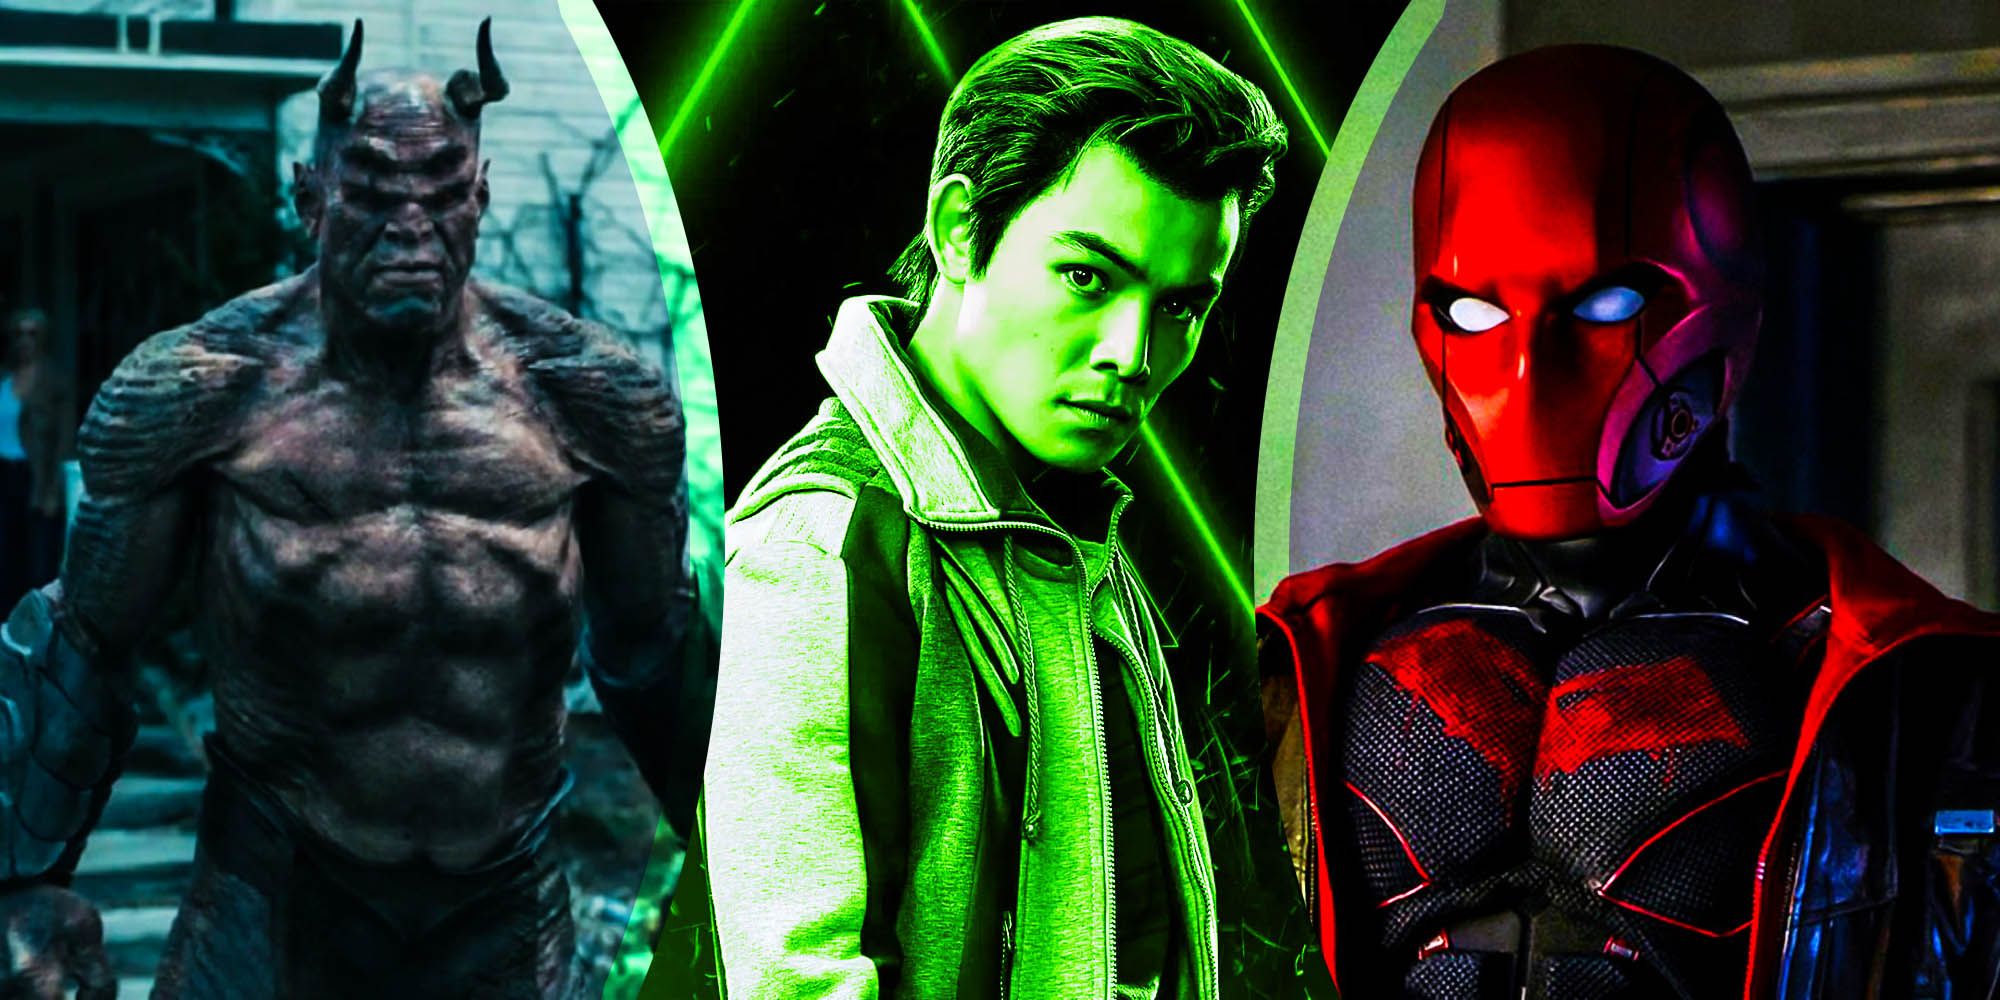 Titans Season 3 Beast boy is the secret weapon against trigon and red hood